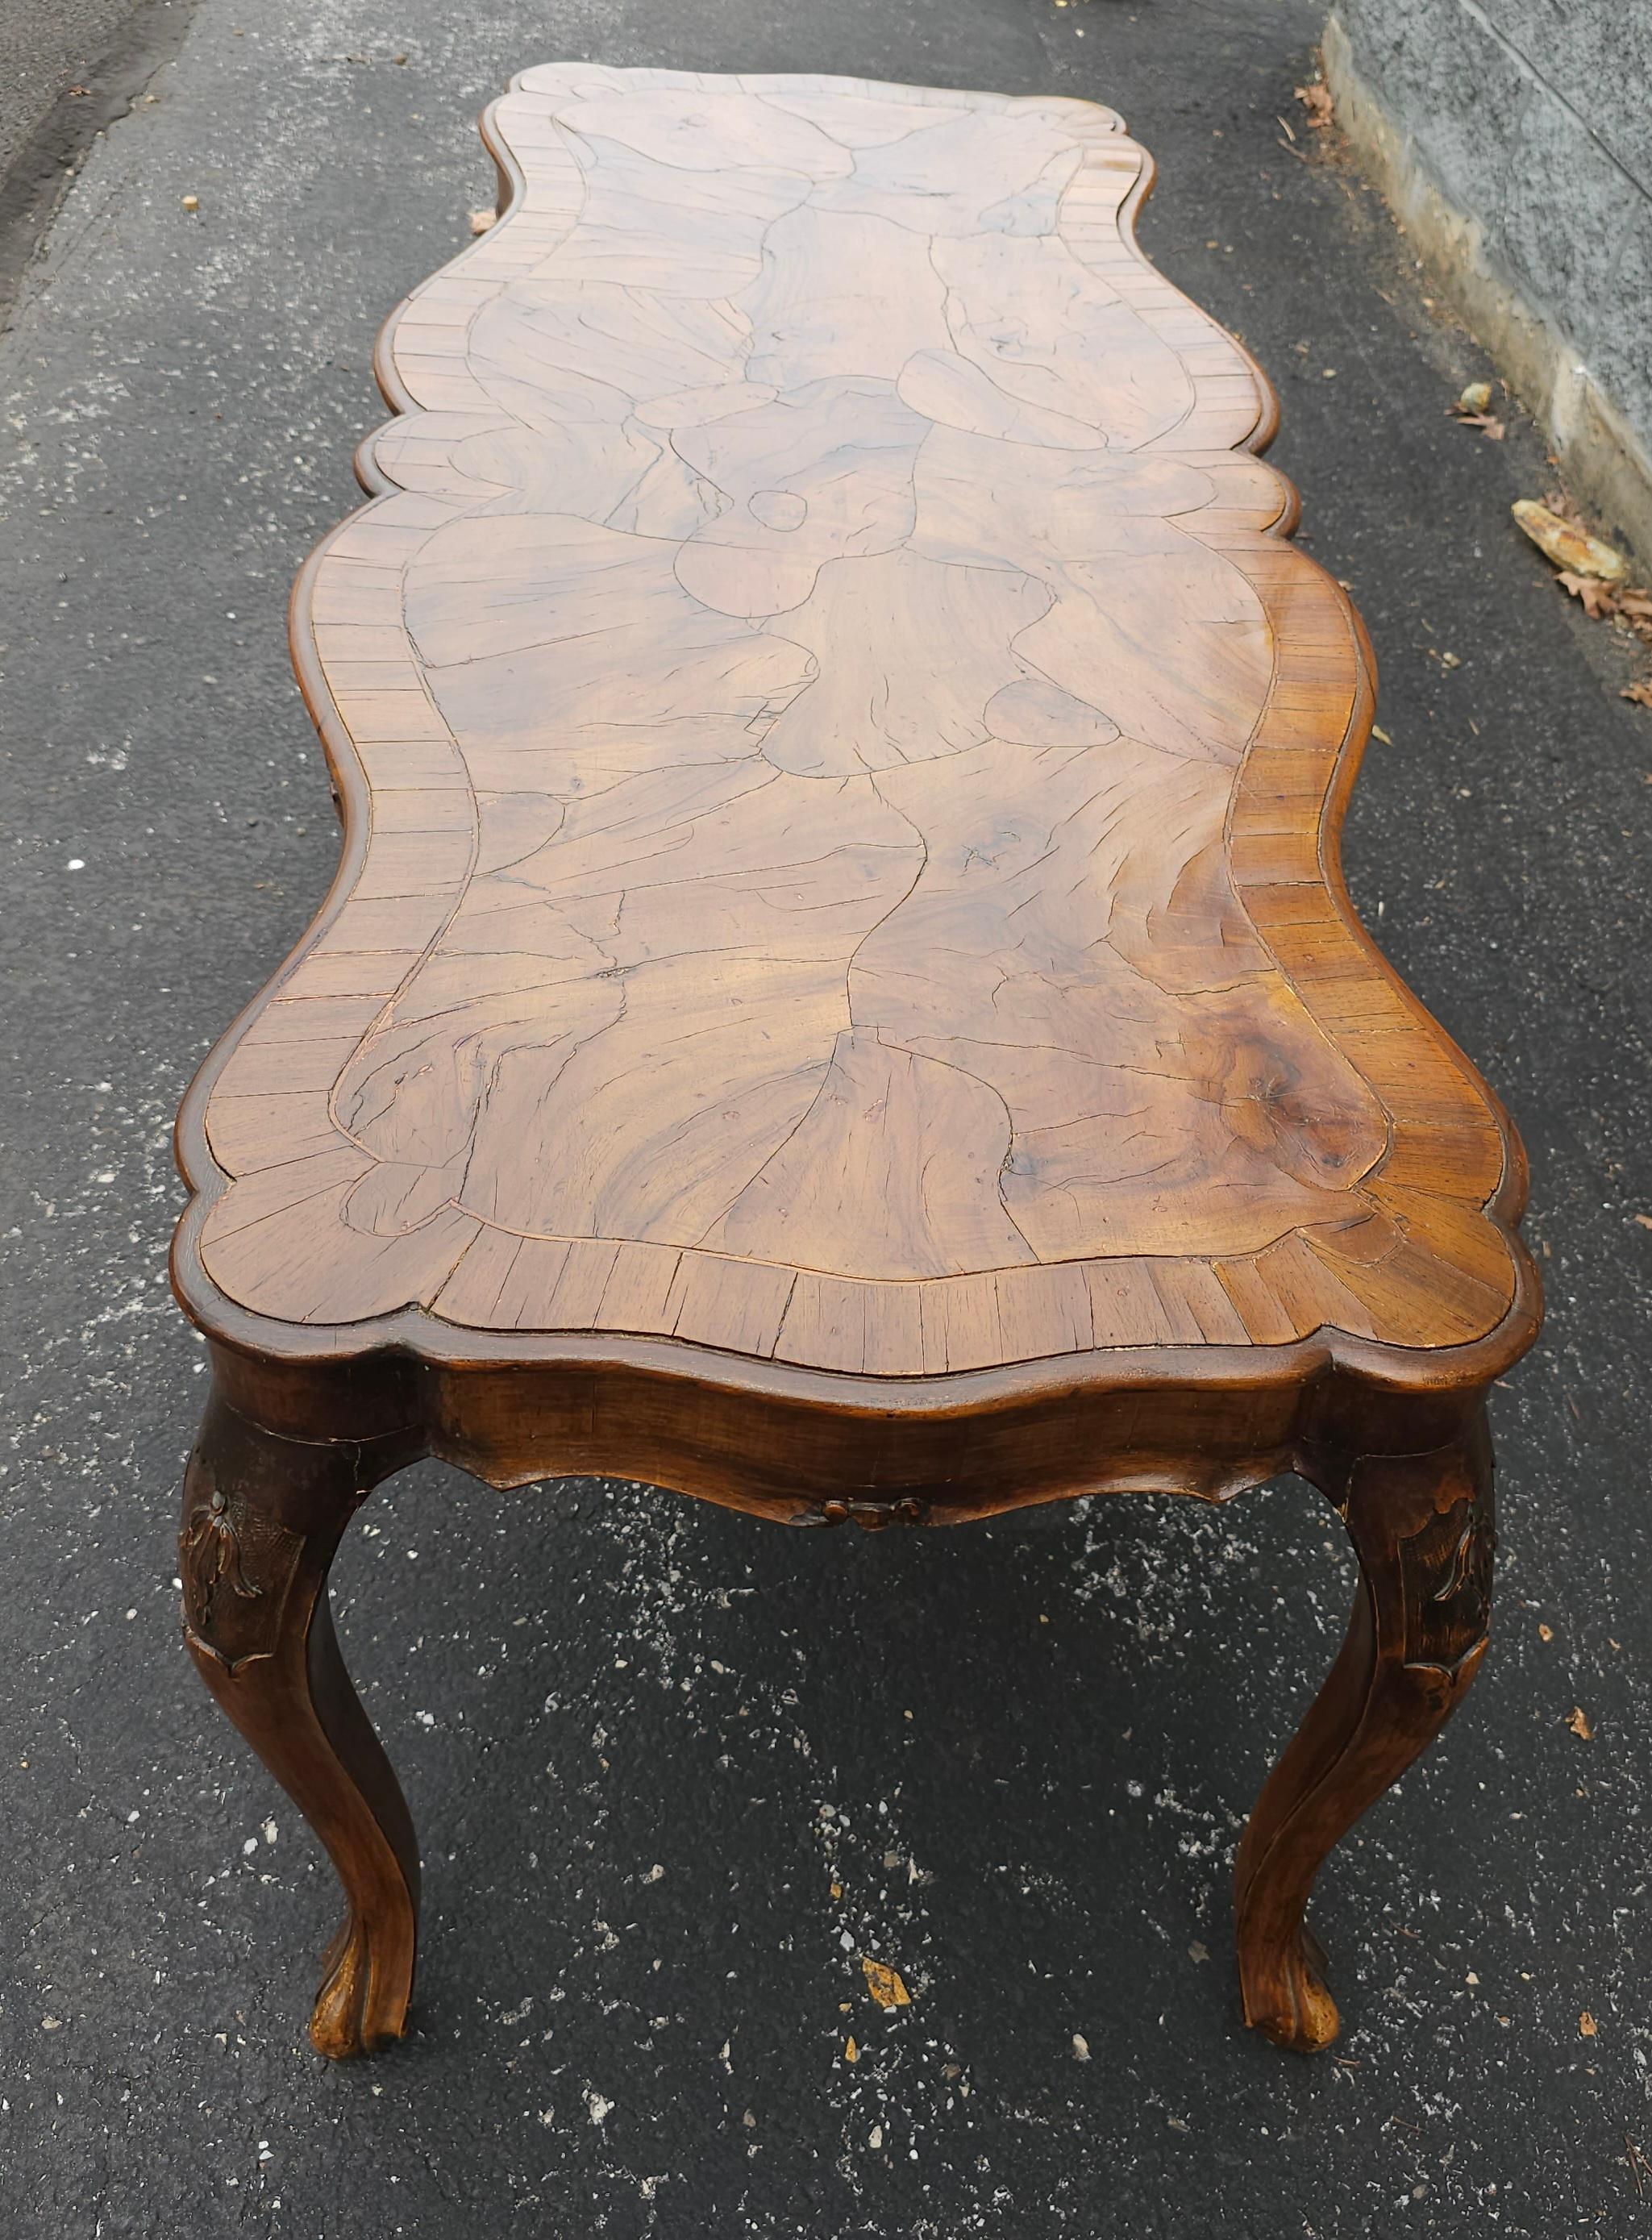 Renaissance Revival Walnut Burl and Fruitwood Cocktail Table In Good Condition For Sale In Germantown, MD